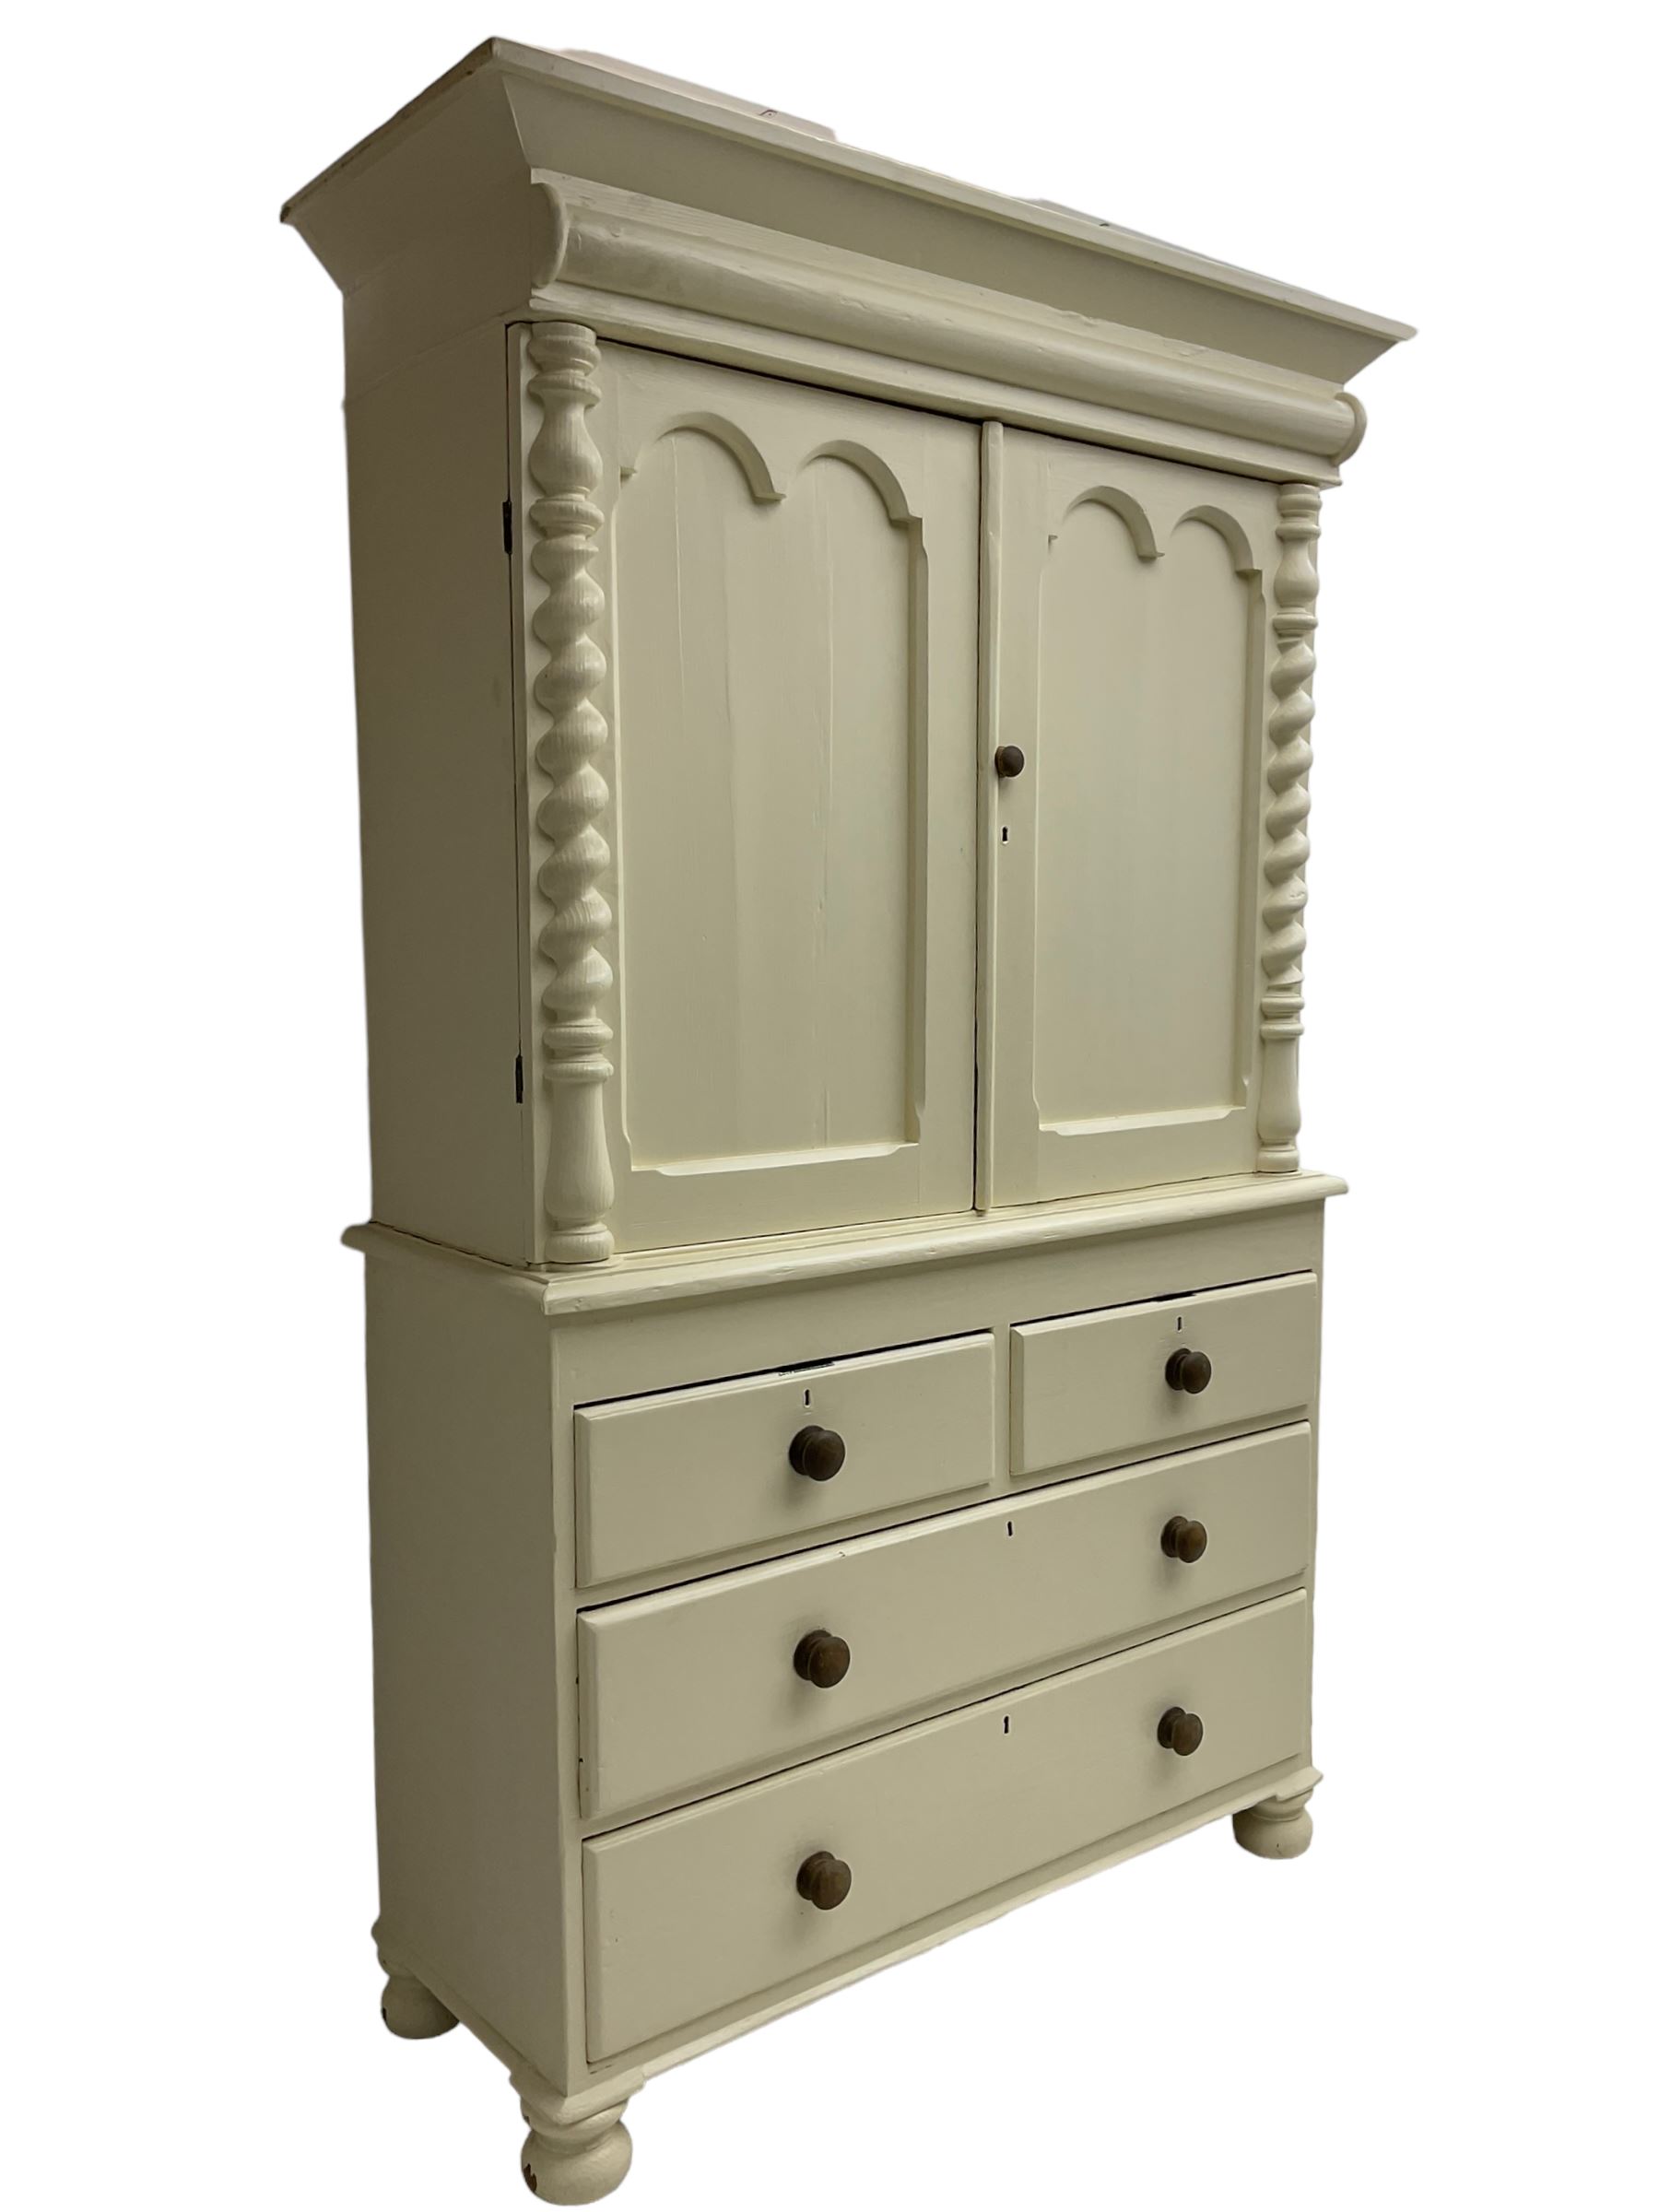 Victorian cream painted pine cupboard-on-chest or housekeeper's cupboard - Image 2 of 7